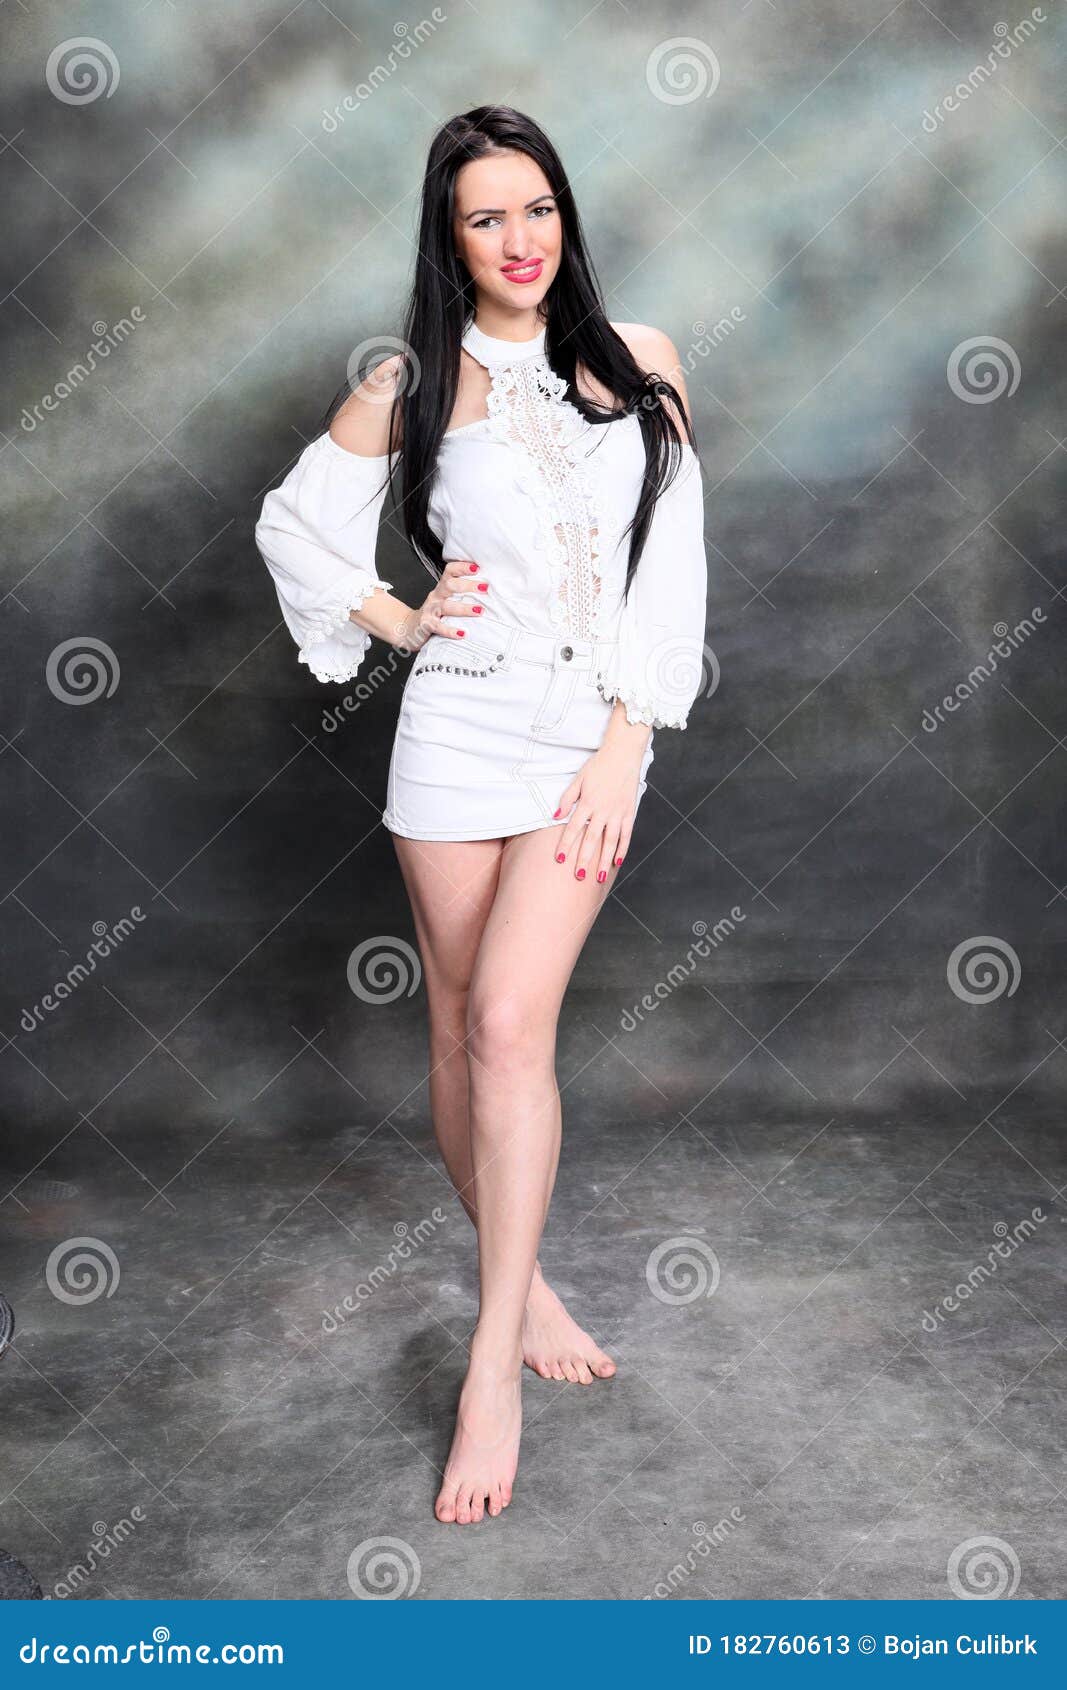 https://thumbs.dreamstime.com/z/beautiful-european-girl-long-black-hair-posing-studio-canvas-background-style-trends-fashion-concept-style-trends-182760613.jpg